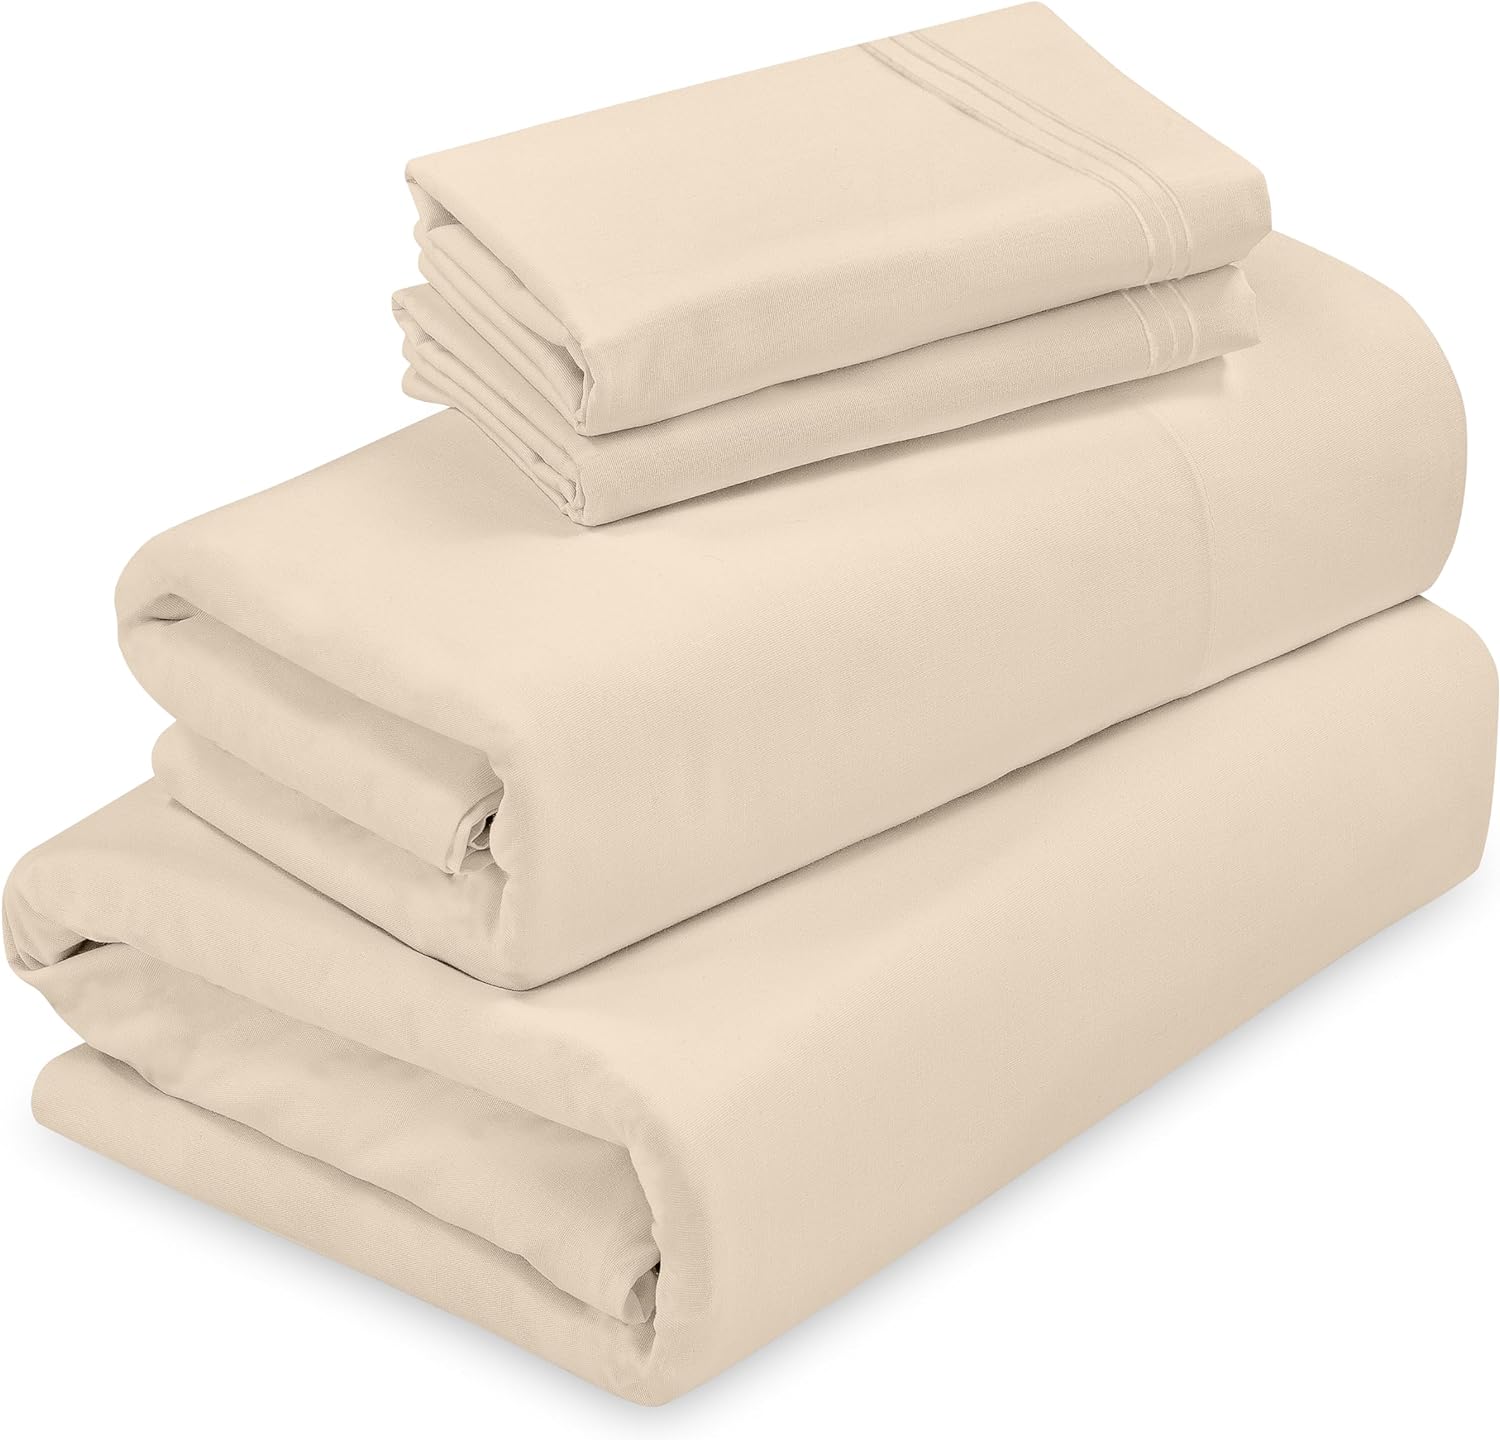 ROYALE LINENS - 4 Piece Queen Bed Sheet - Soft Brushed Microfiber 1800 Bedding Set - 1 Fitted Sheet, 1 Flat Sheet, 2 Pillow Cases - Wrinkle & Fade Resistant Luxury Queen Size Sheet Set (Queen, Sand)